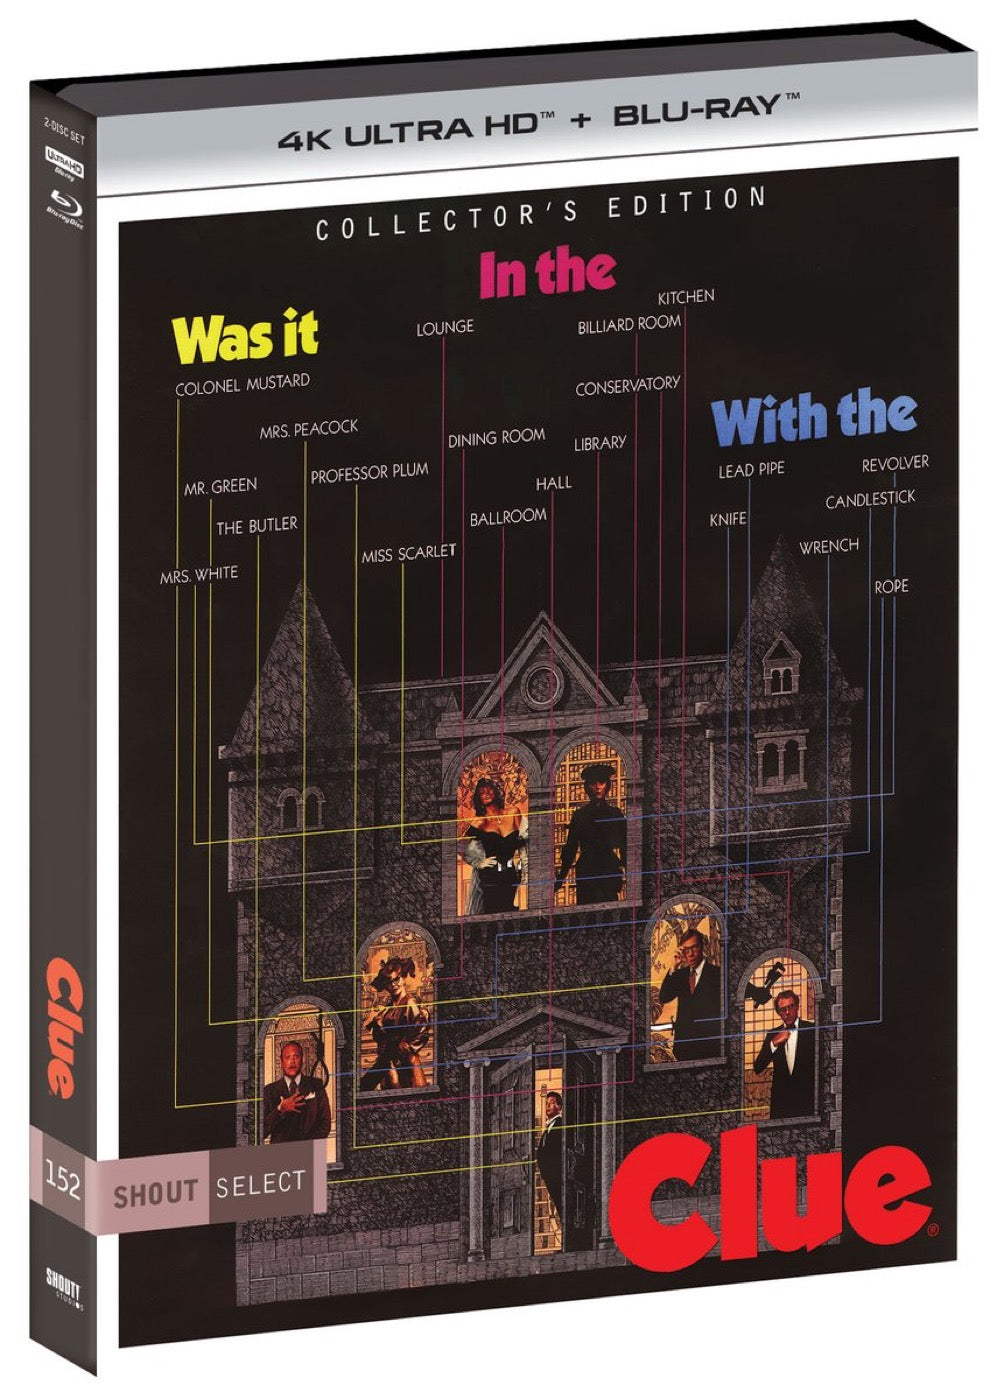 Clue 4K UHD + Blu-ray Collector's Edition with Slipcover (Shout Factory) [Preorder]